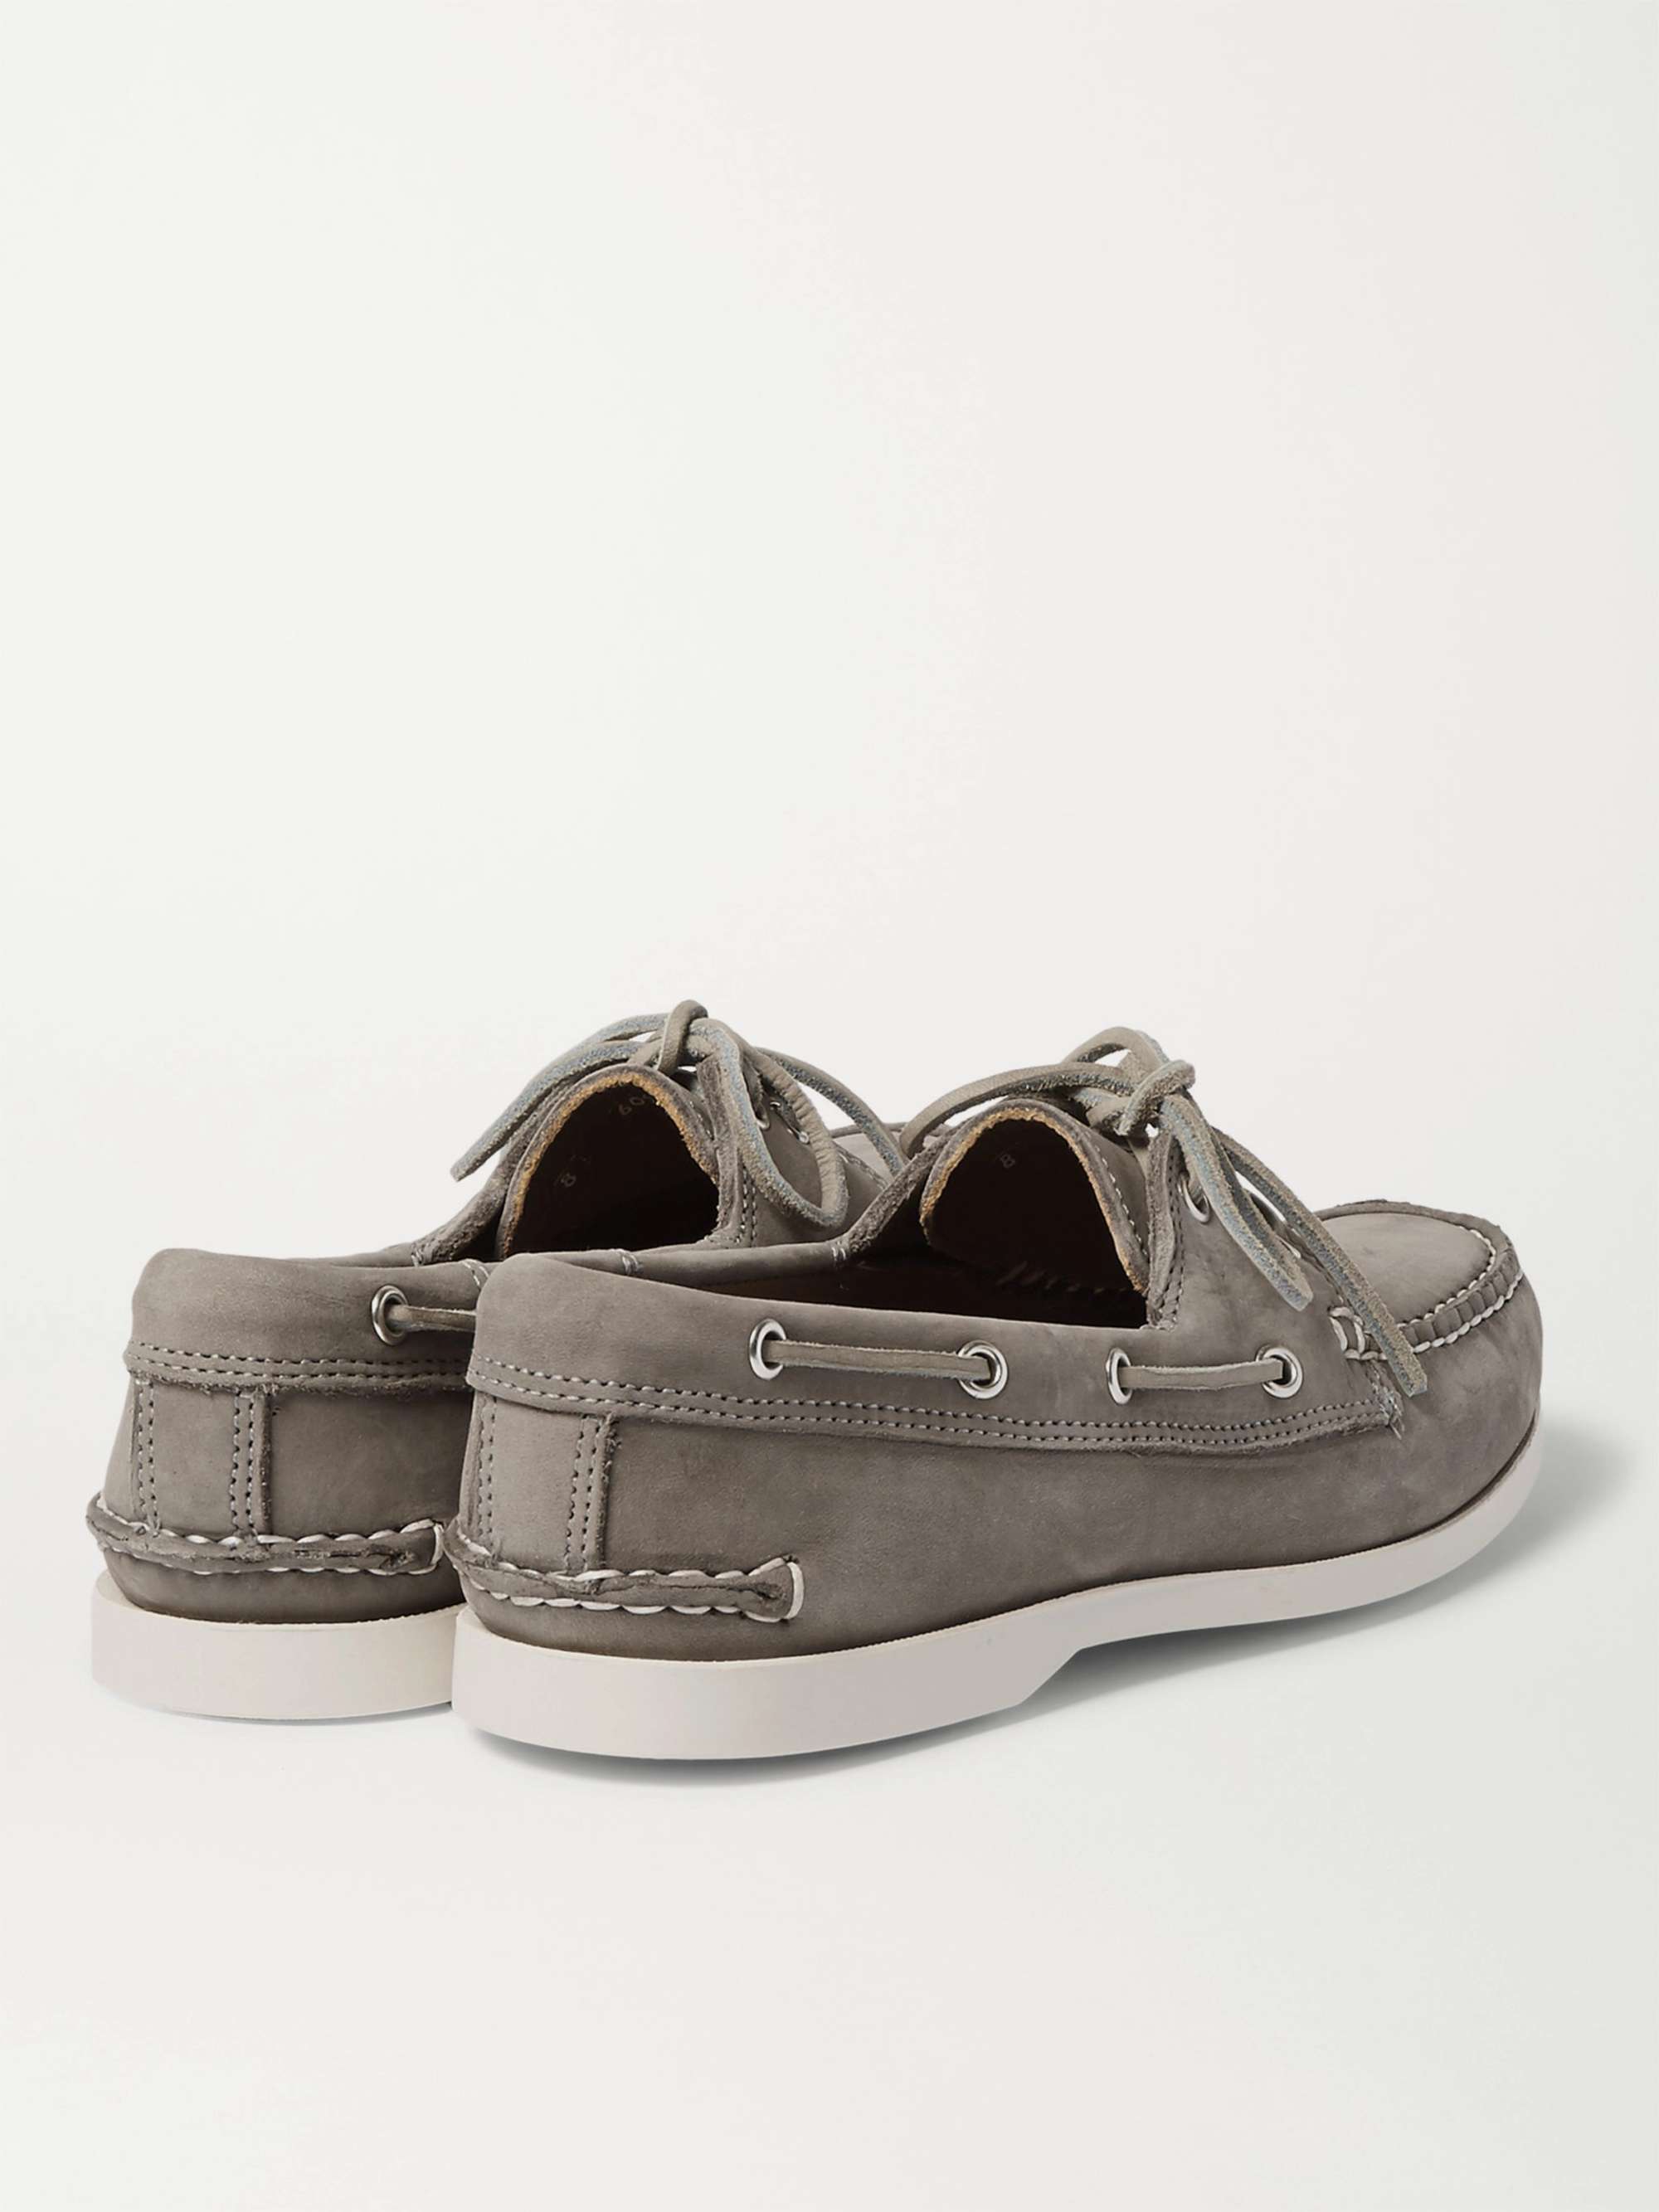 QUODDY Downeast Nubuck Boat Shoes